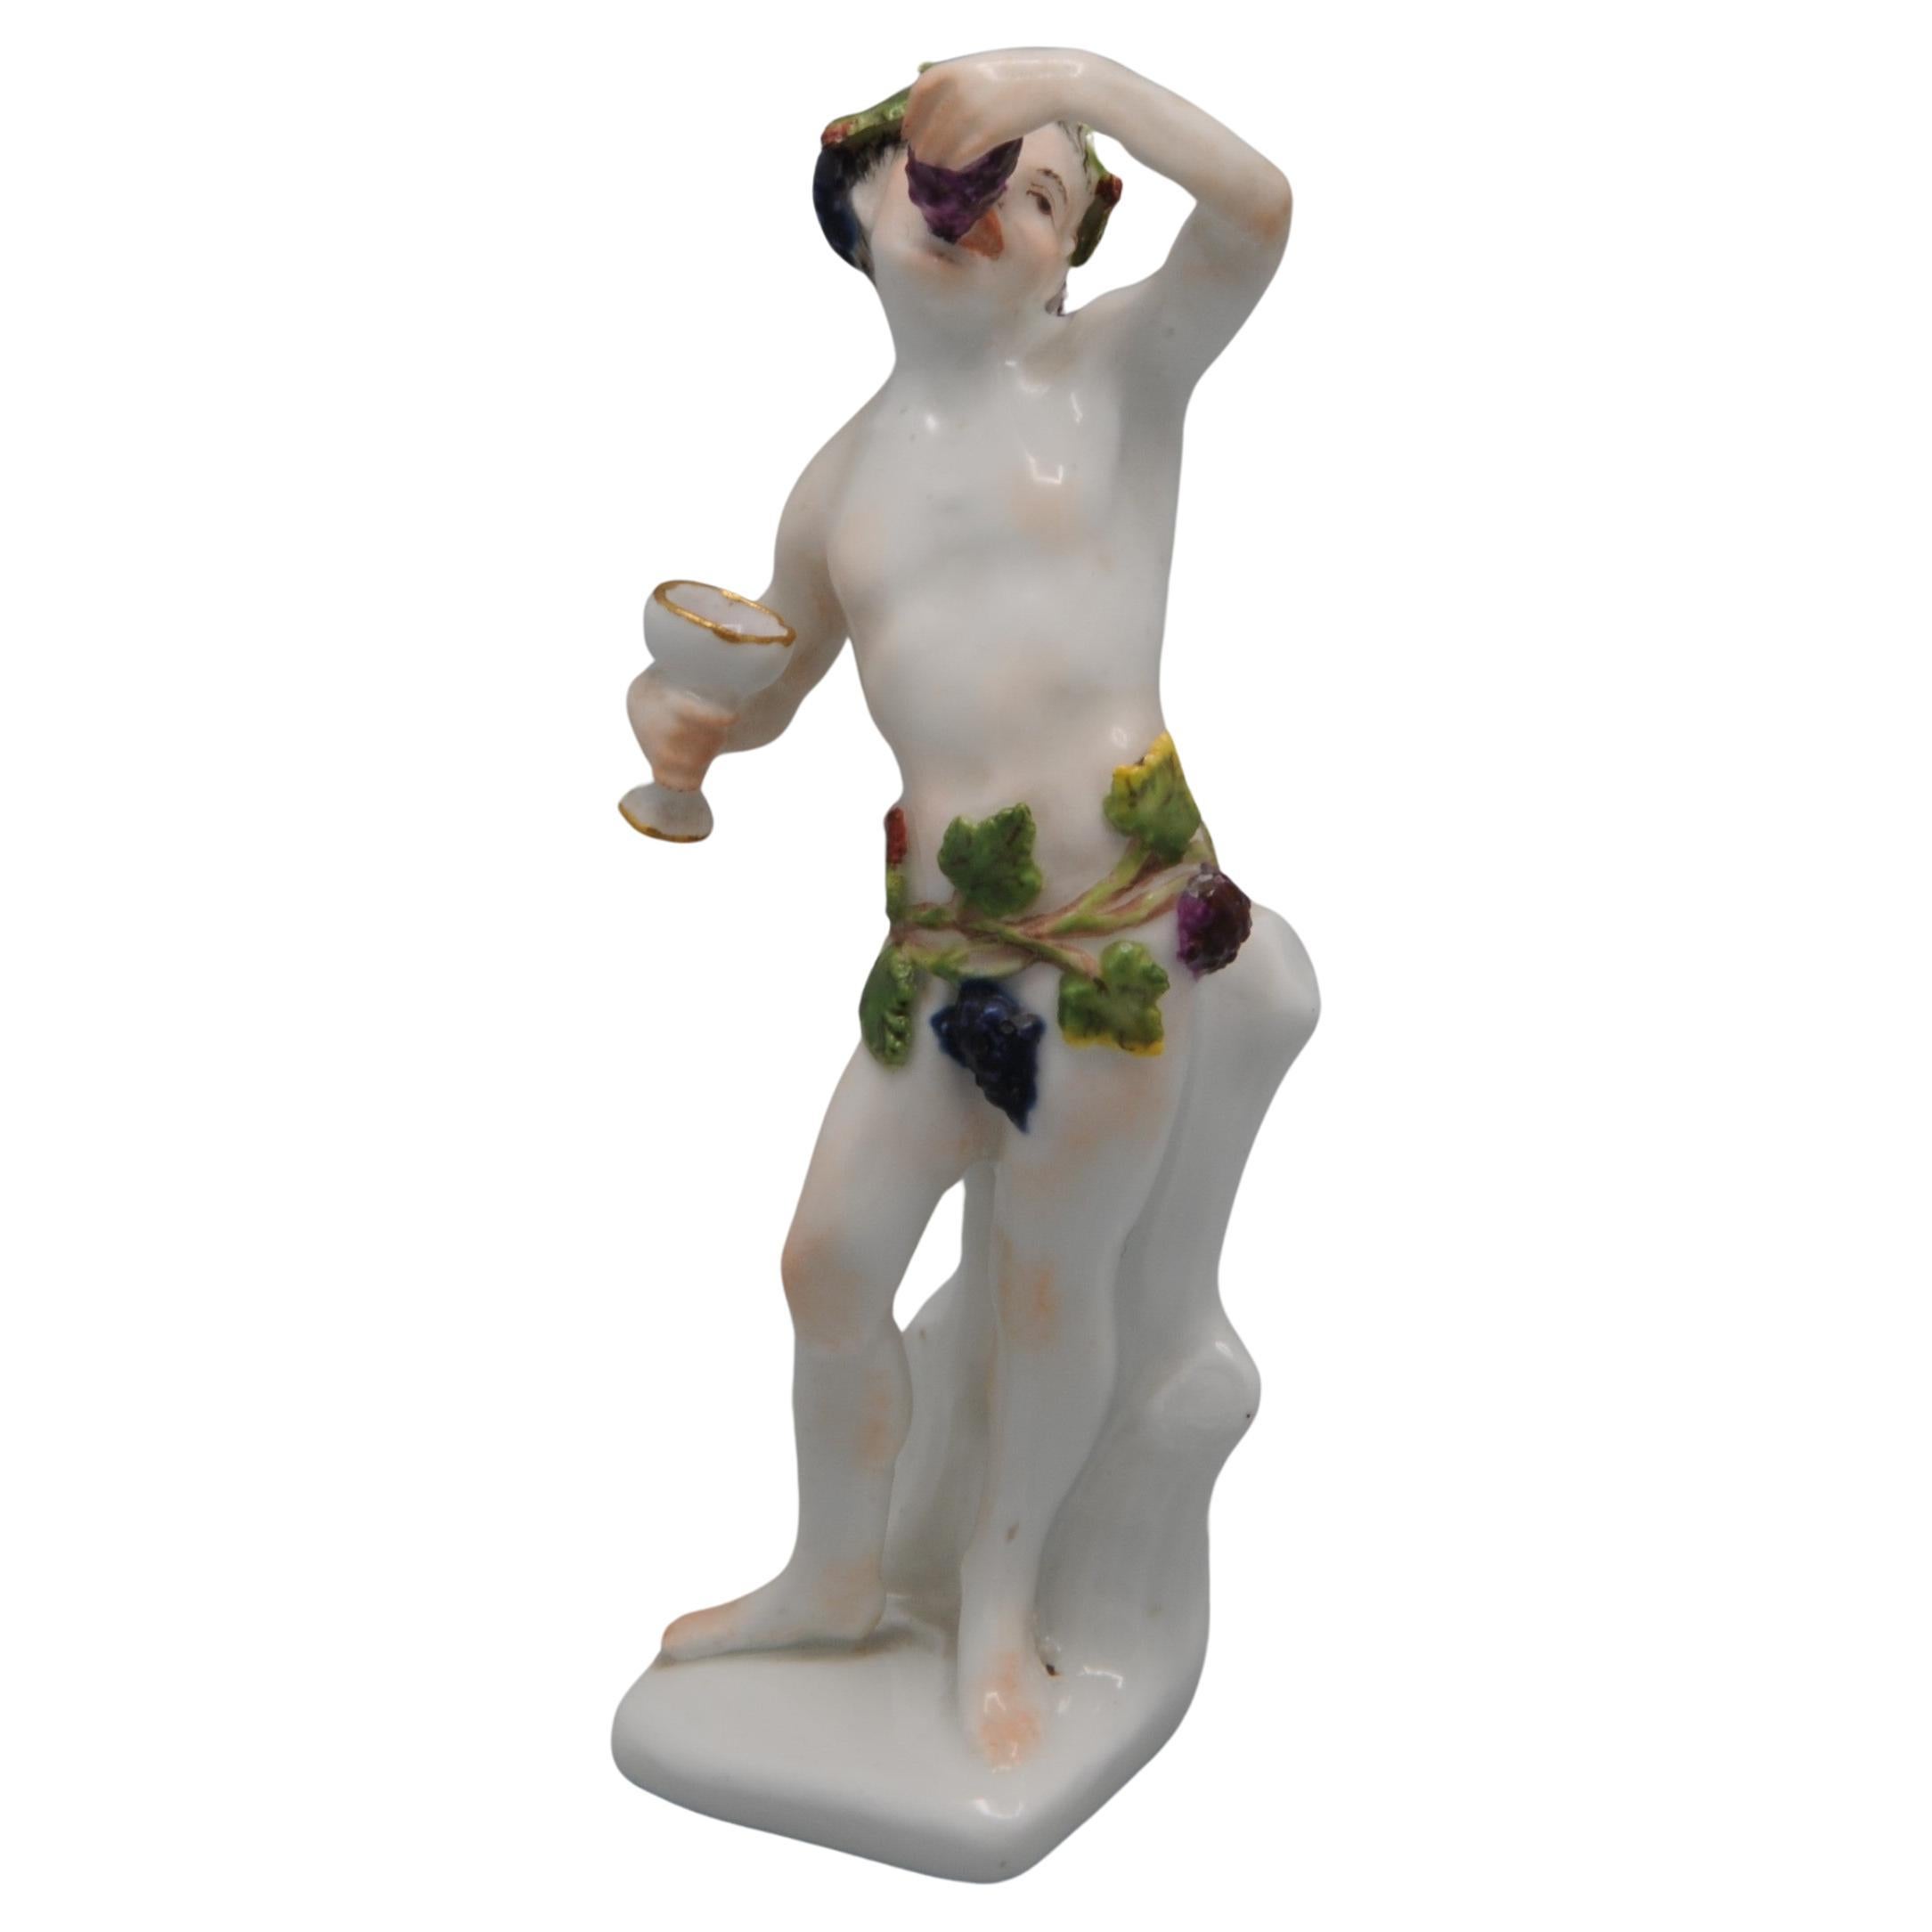 Early Meissen figurine of a bacchant eating from a grapes, as an allegory of autumn.
Model by Joachim Kaendler.
unmarked, ca 1740-60. 